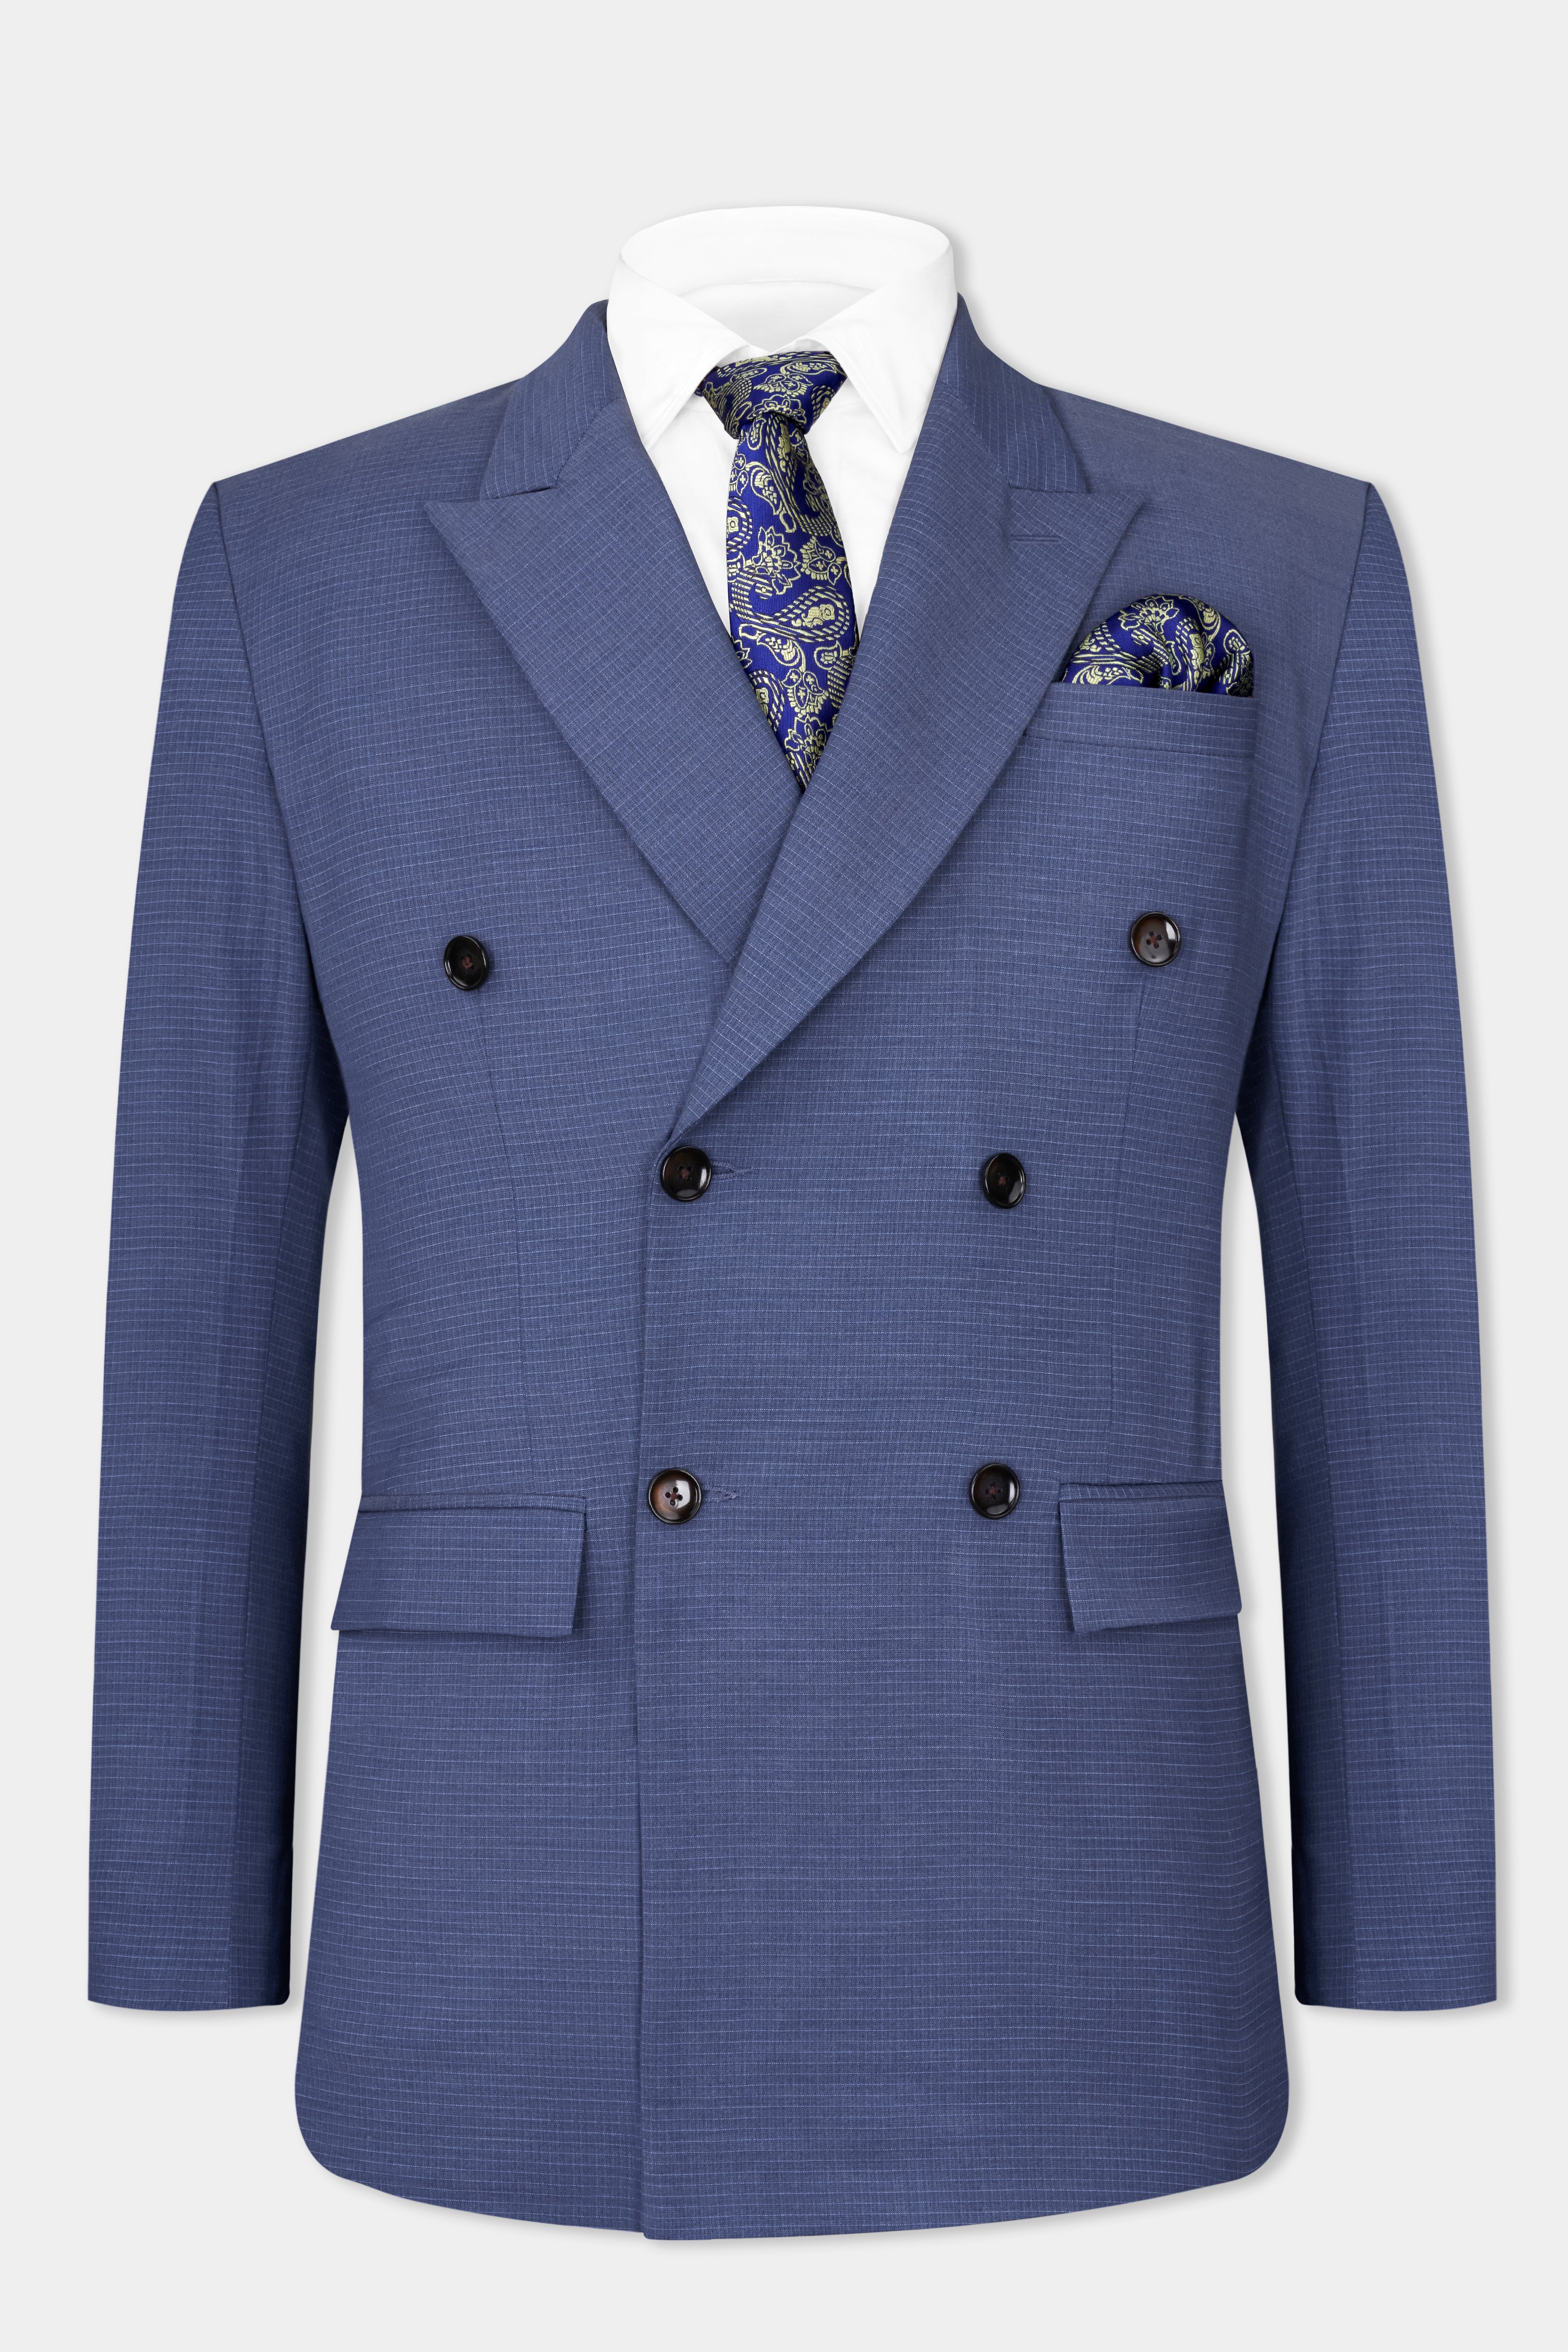 Twilight Blue Checkered Double Breasted Wool Rich Suit ST2768-DB-36,ST2768-DB-38,ST2768-DB-40,ST2768-DB-42,ST2768-DB-44,ST2768-DB-46,ST2768-DB-48,ST2768-DB-50,ST2768-DB-52,ST2768-DB-54,ST2768-DB-56,ST2768-DB-58,ST2768-DB-60